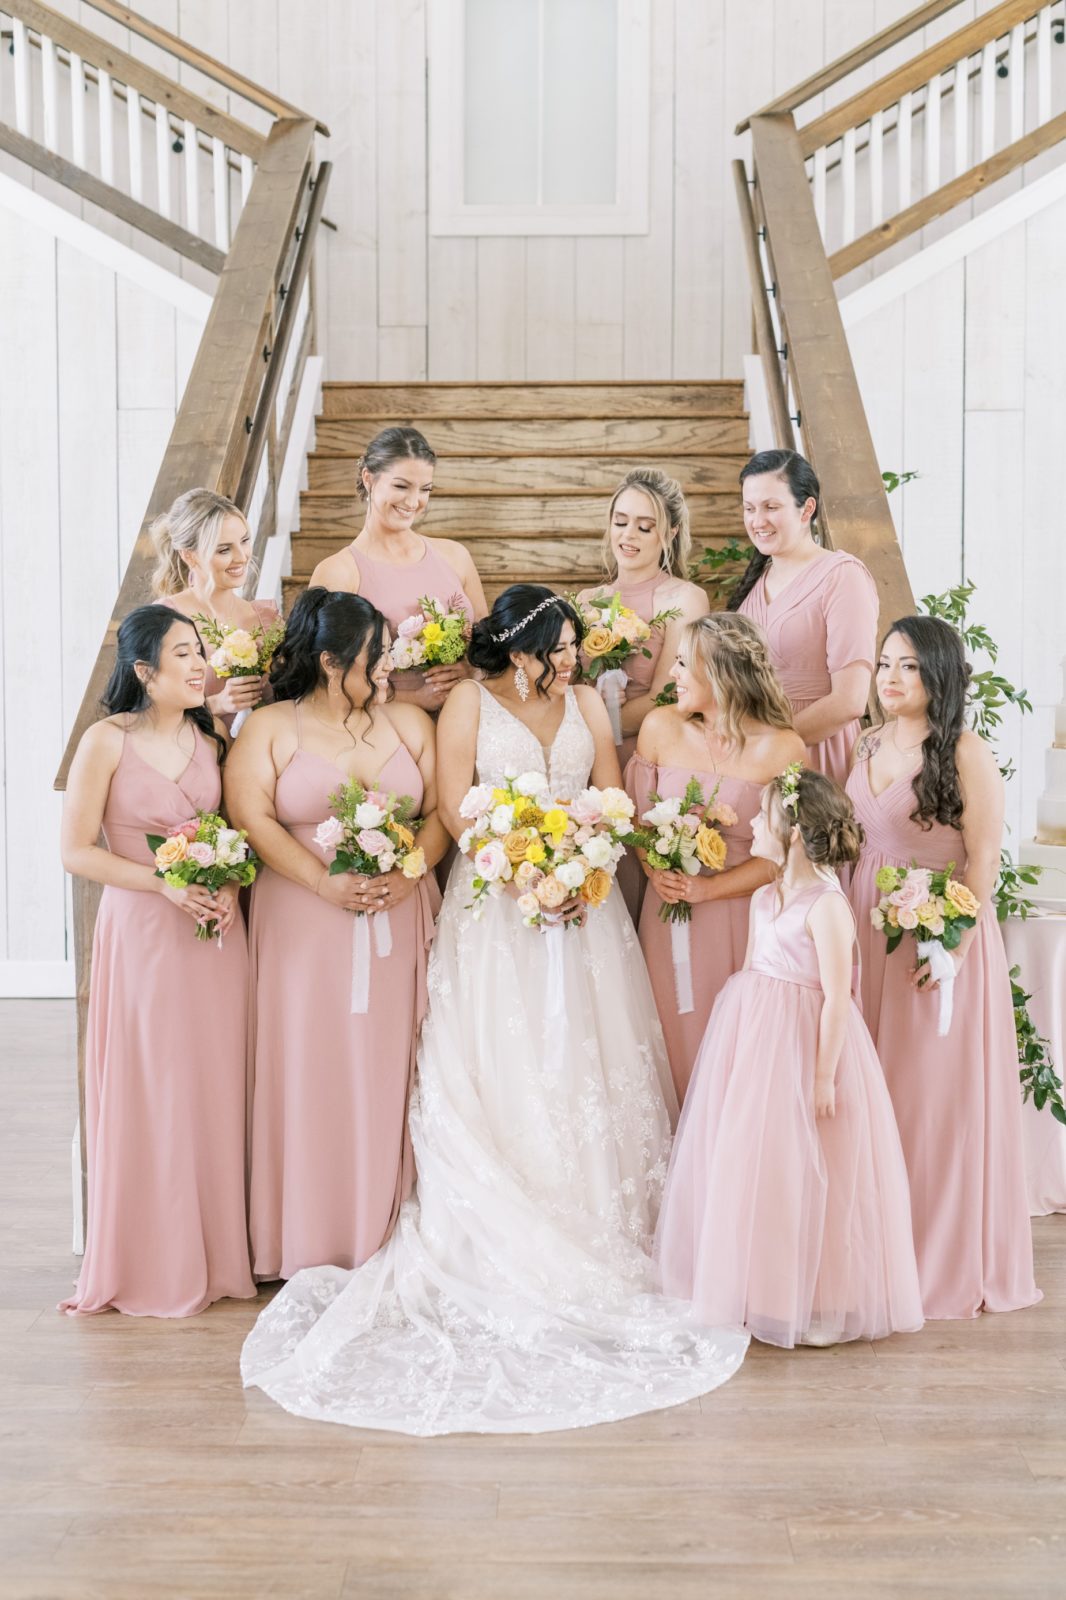 A bride with her bridesmaids all gathered around chatting by Christina Elliott Photography. brides best friends pink #ChristinaElliottPhotography #ChristinaElliottWeddings #Houstonwedding #TheSpringsVenue #EastHoustonweddings #Mrs #Mr